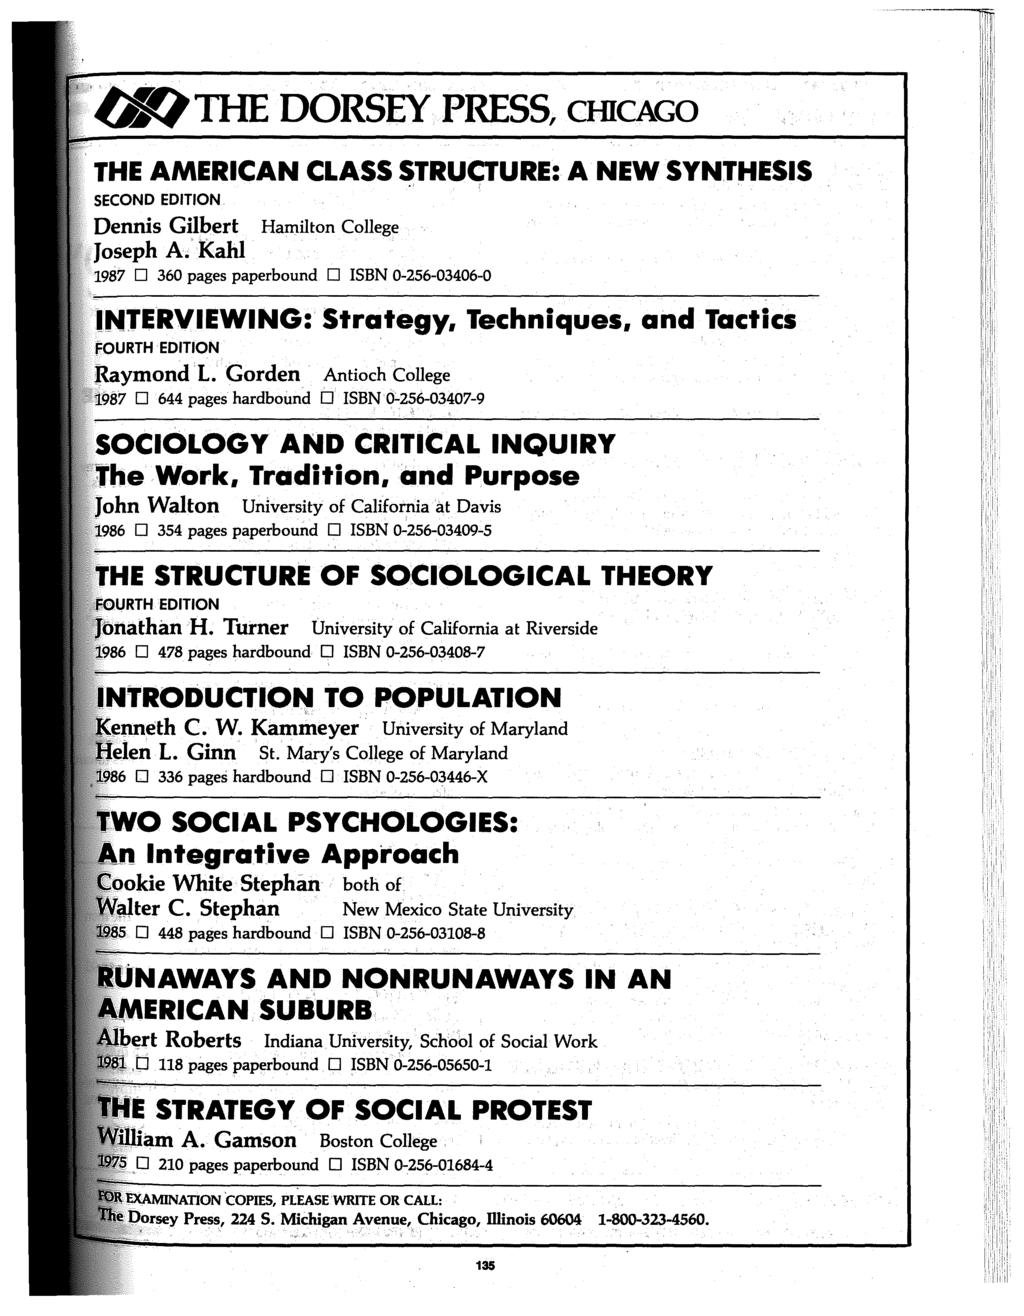 '(J'hTHE DORSEY PRESS, CHICAGO THE AMERICAN CLASS ~TRUCTURE: A NEW SYNTHESIS SECOND EDITION Dennis Gilbert Hamilton College,Joseph A.